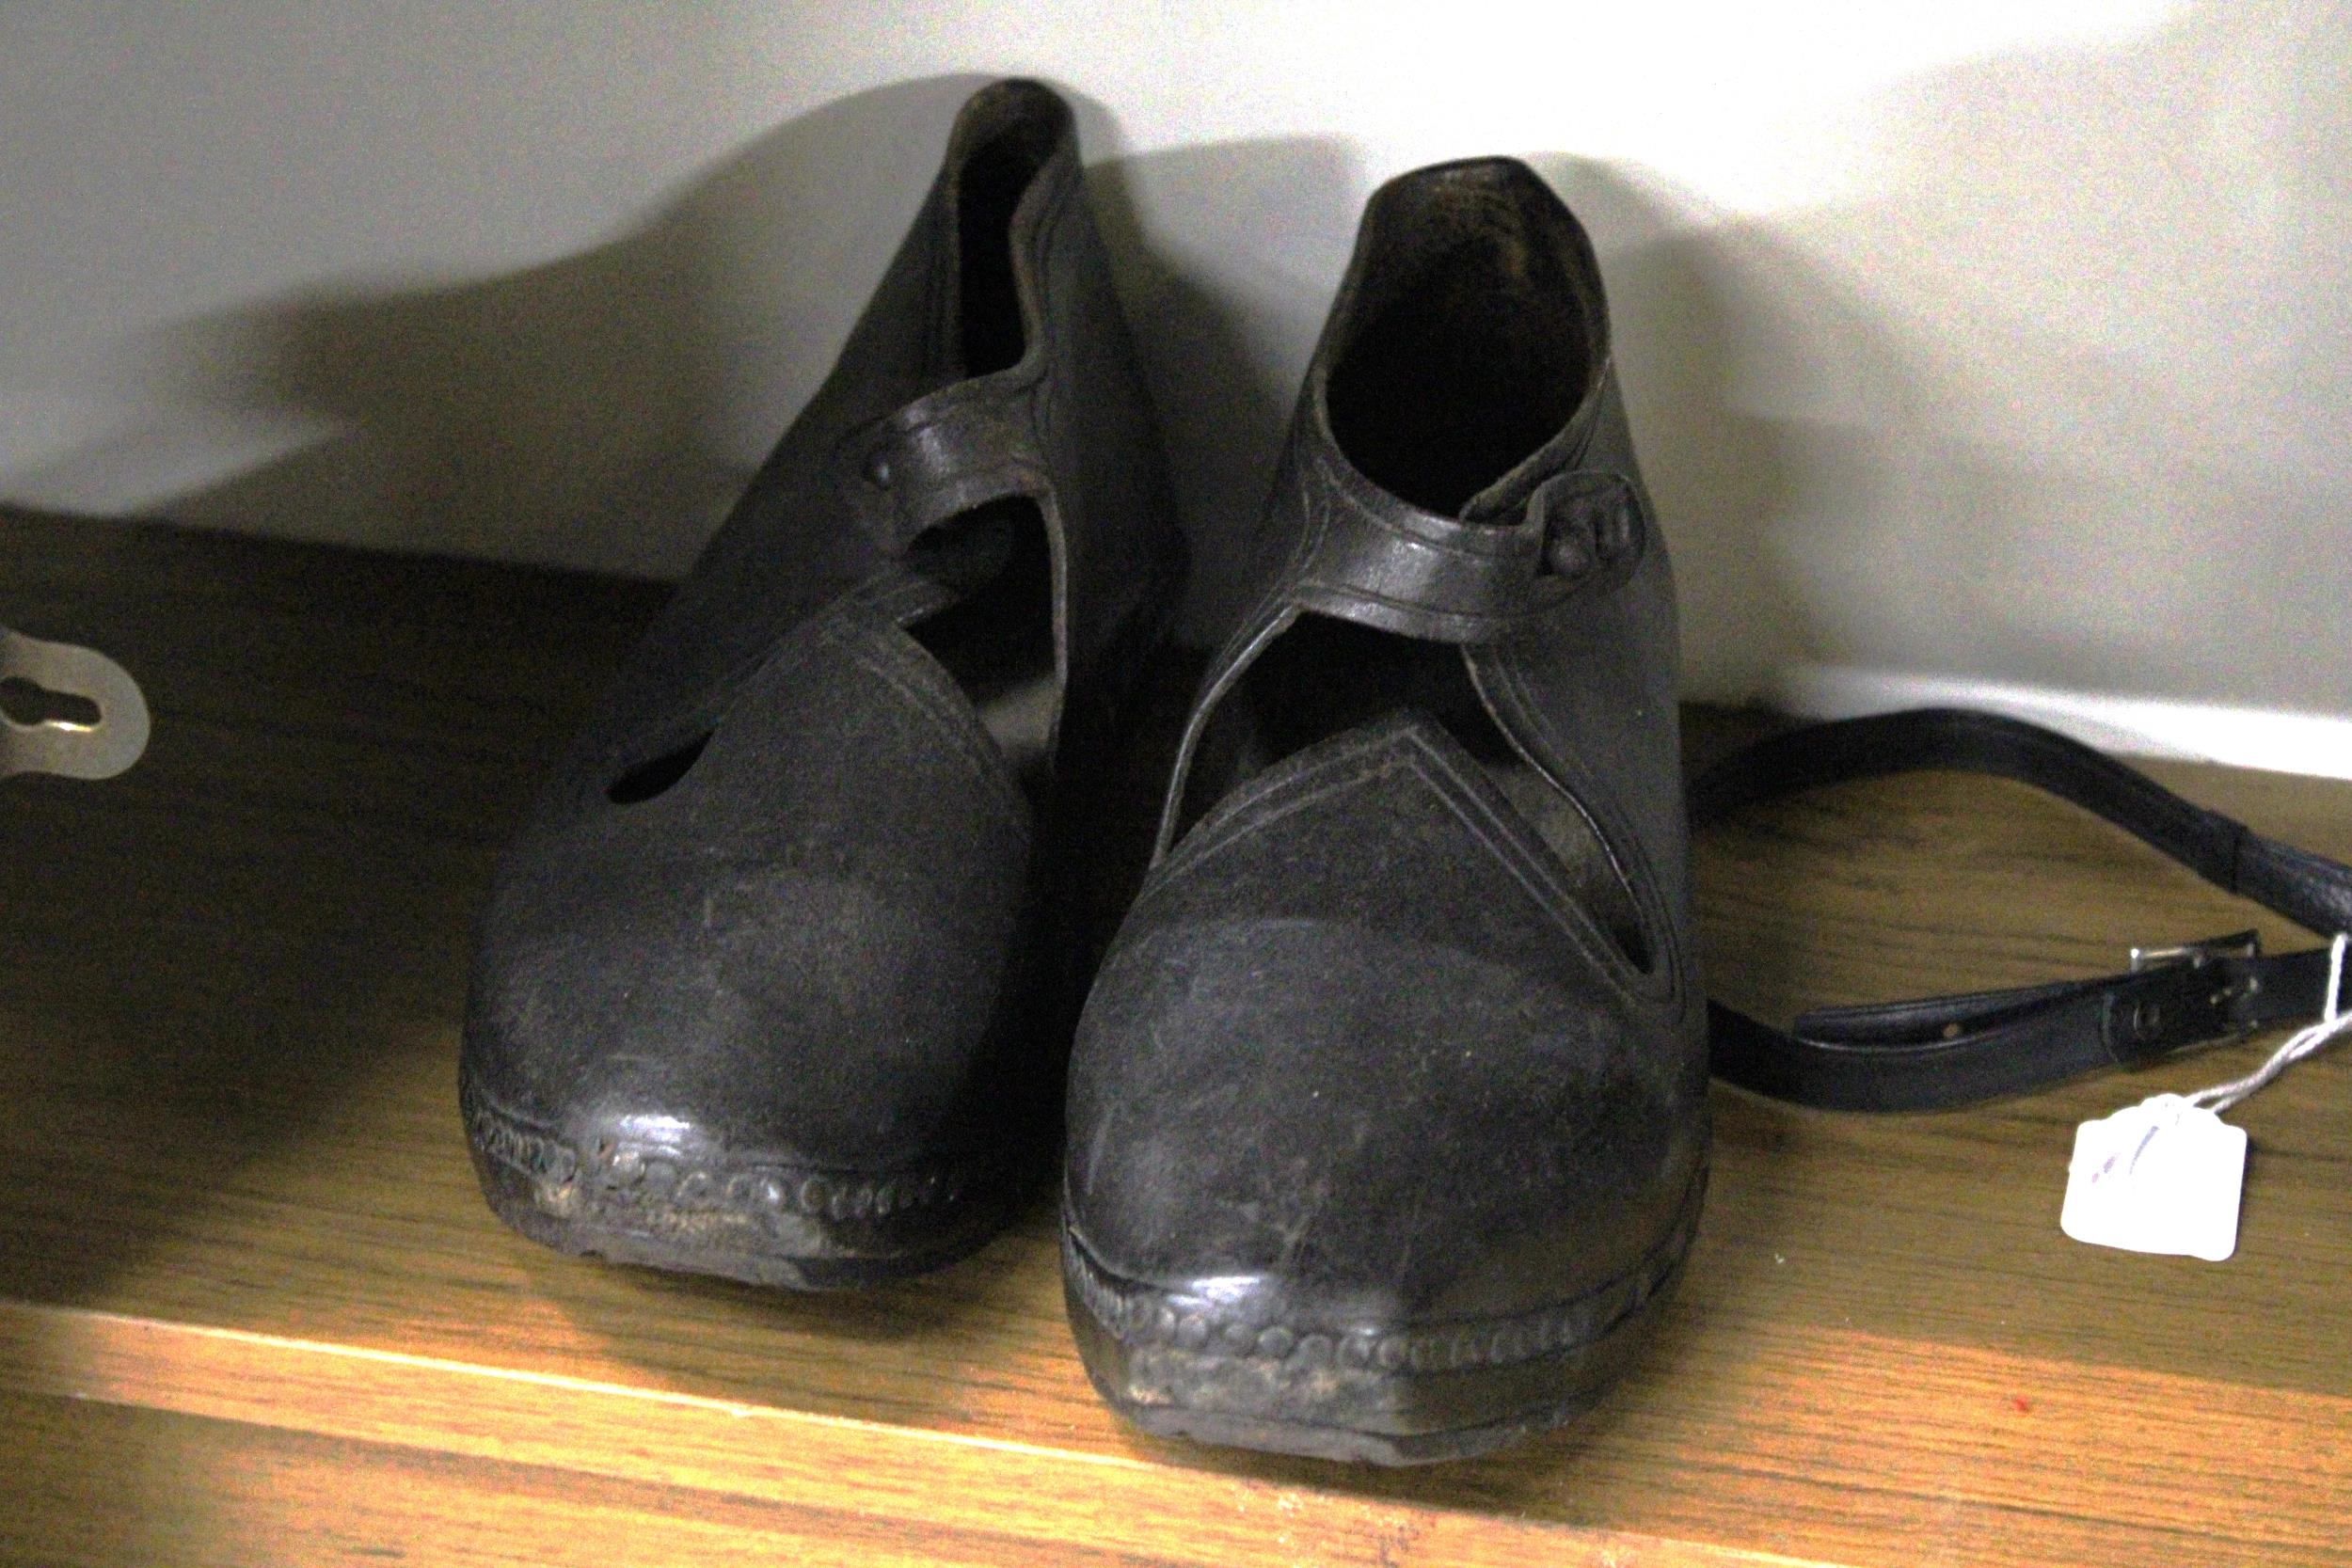 A PAIR OF VINTAGE 'SPARKING' CLOGS